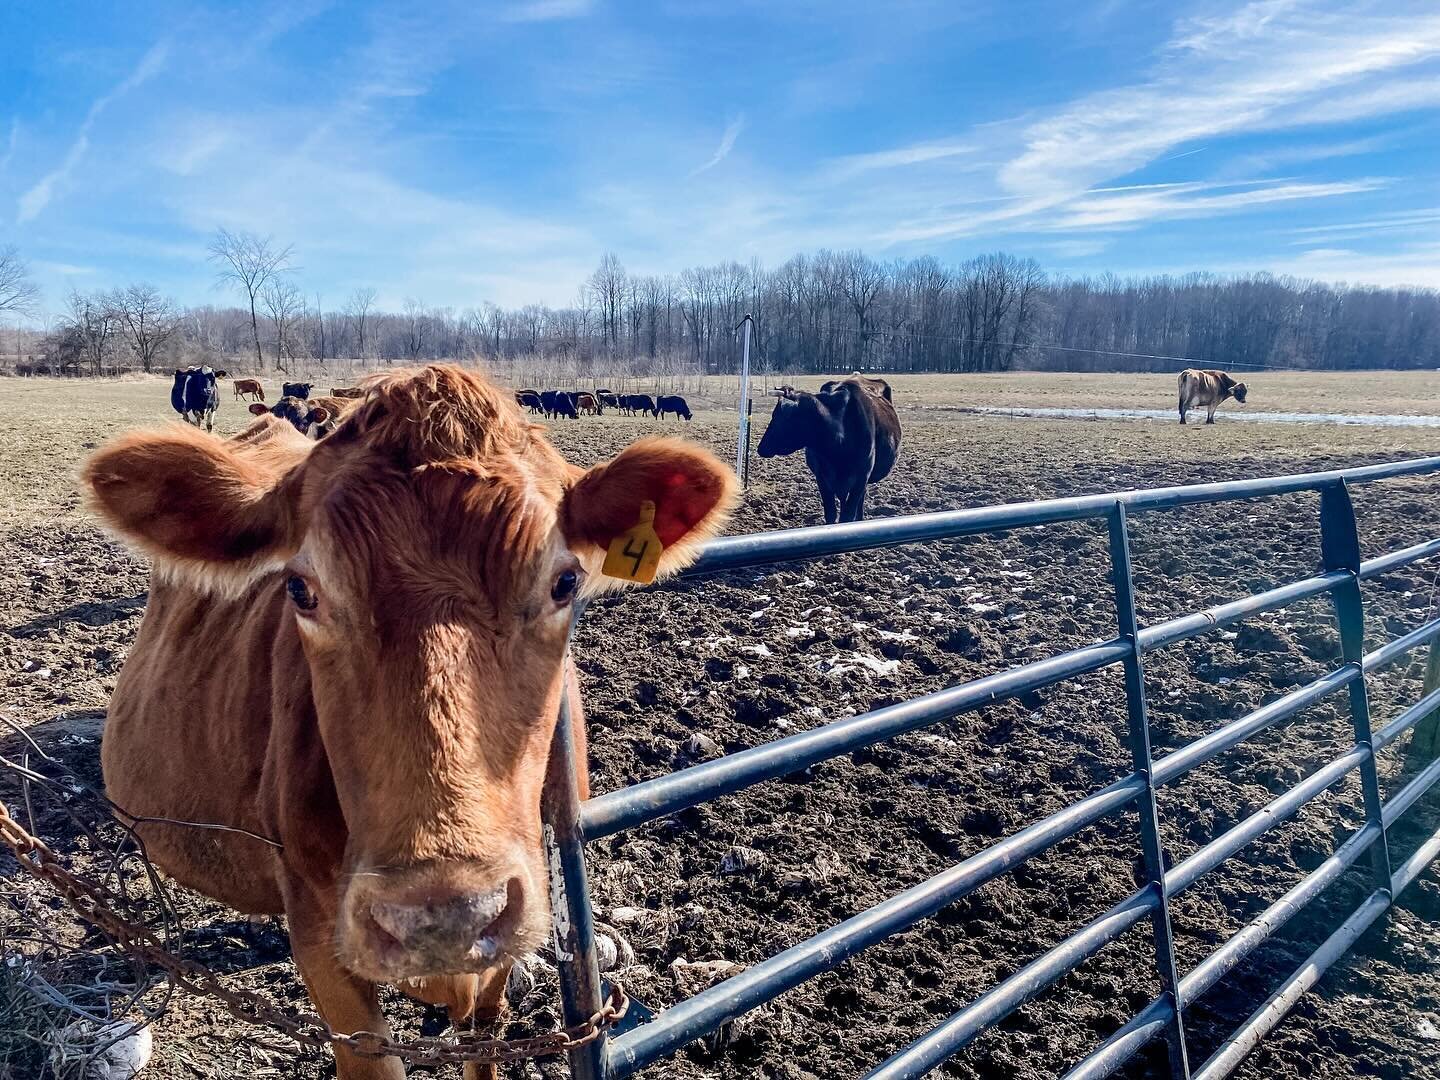 Oooooo it&rsquo;s too real! That blue sky! The warmth of the sun! The cows are ready for spring and so are we! 🌱
&hellip;
While there&rsquo;s nothing to graze, they still have access to the dormant pasture every day to stretch their legs and nap in 